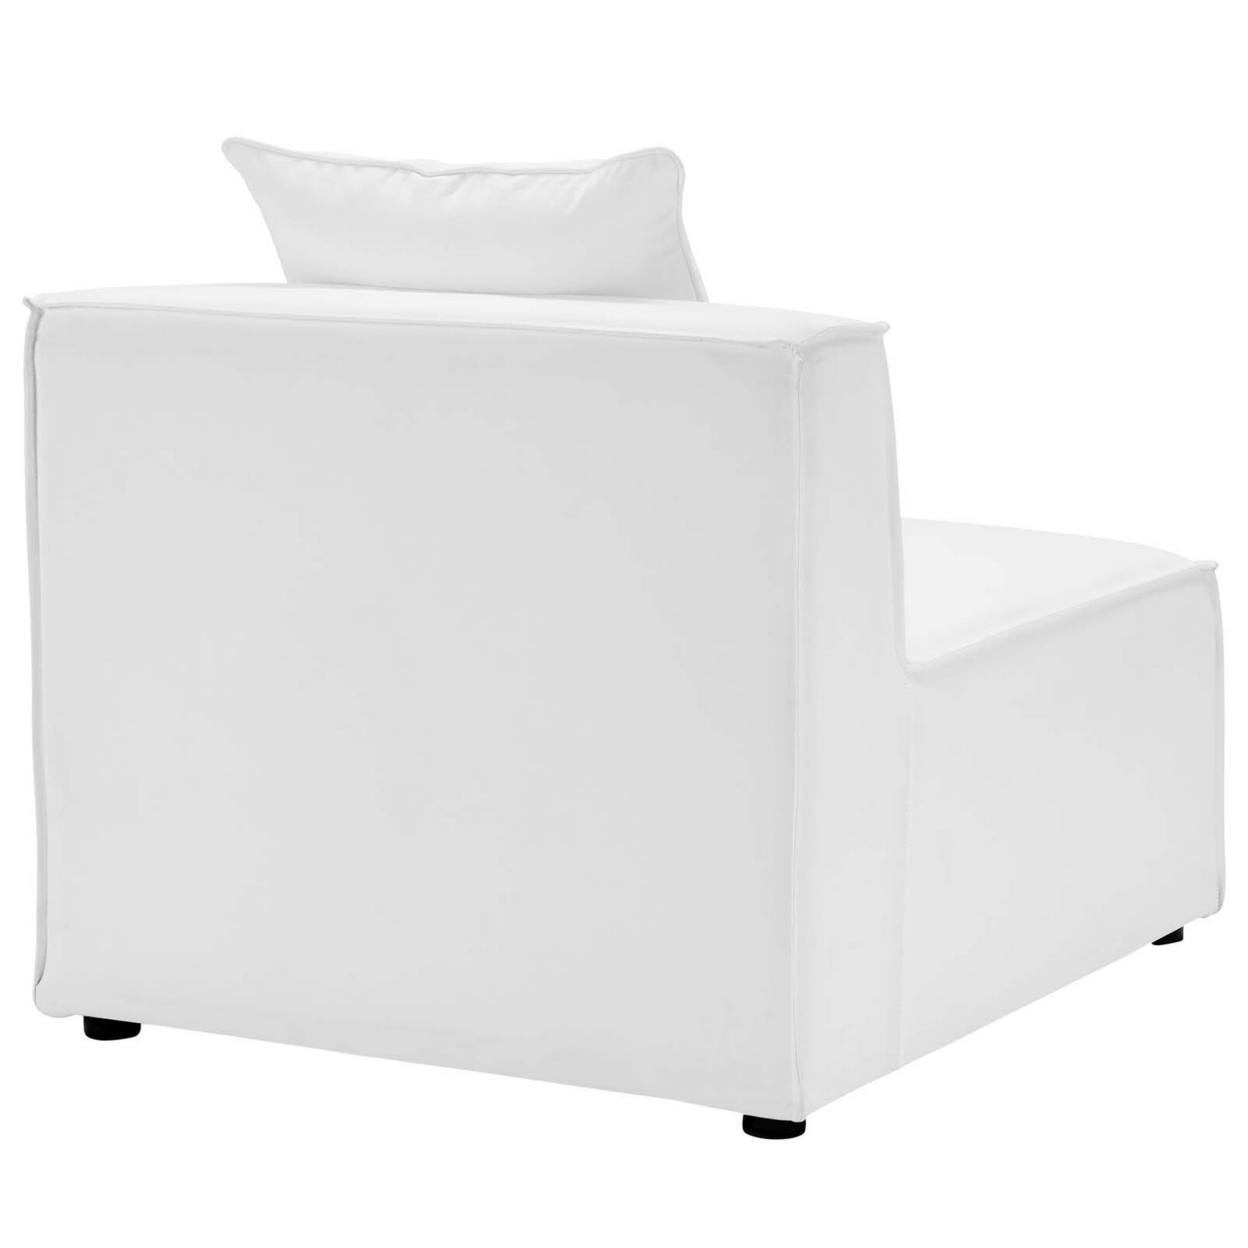 Saybrook Outdoor Patio Upholstered Sectional Sofa Armless Chair, White